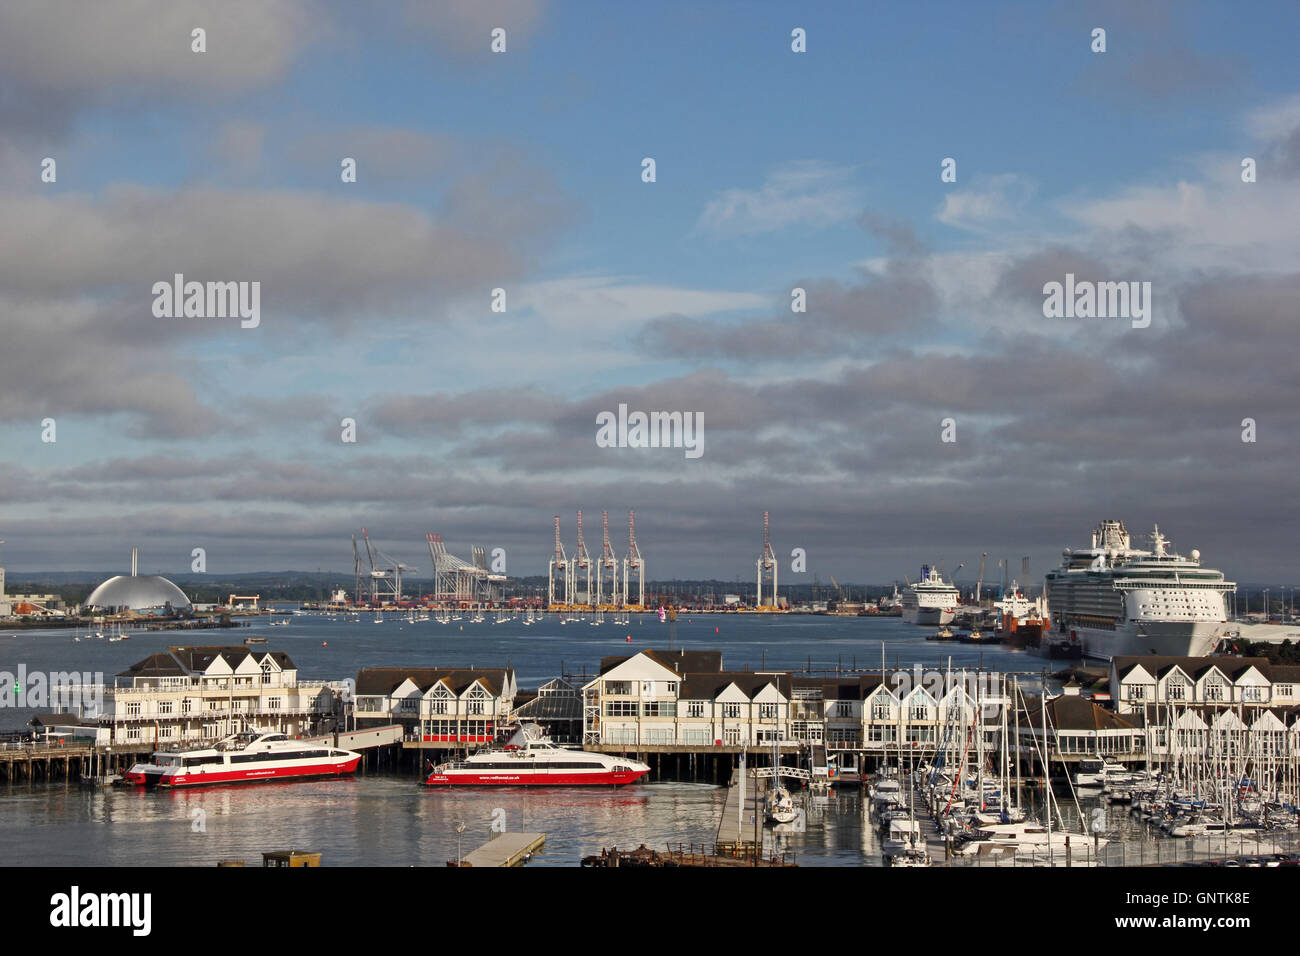 Southampton from docks, with cruise ships and Red Funnel ferry boats in foreground. Stock Photo